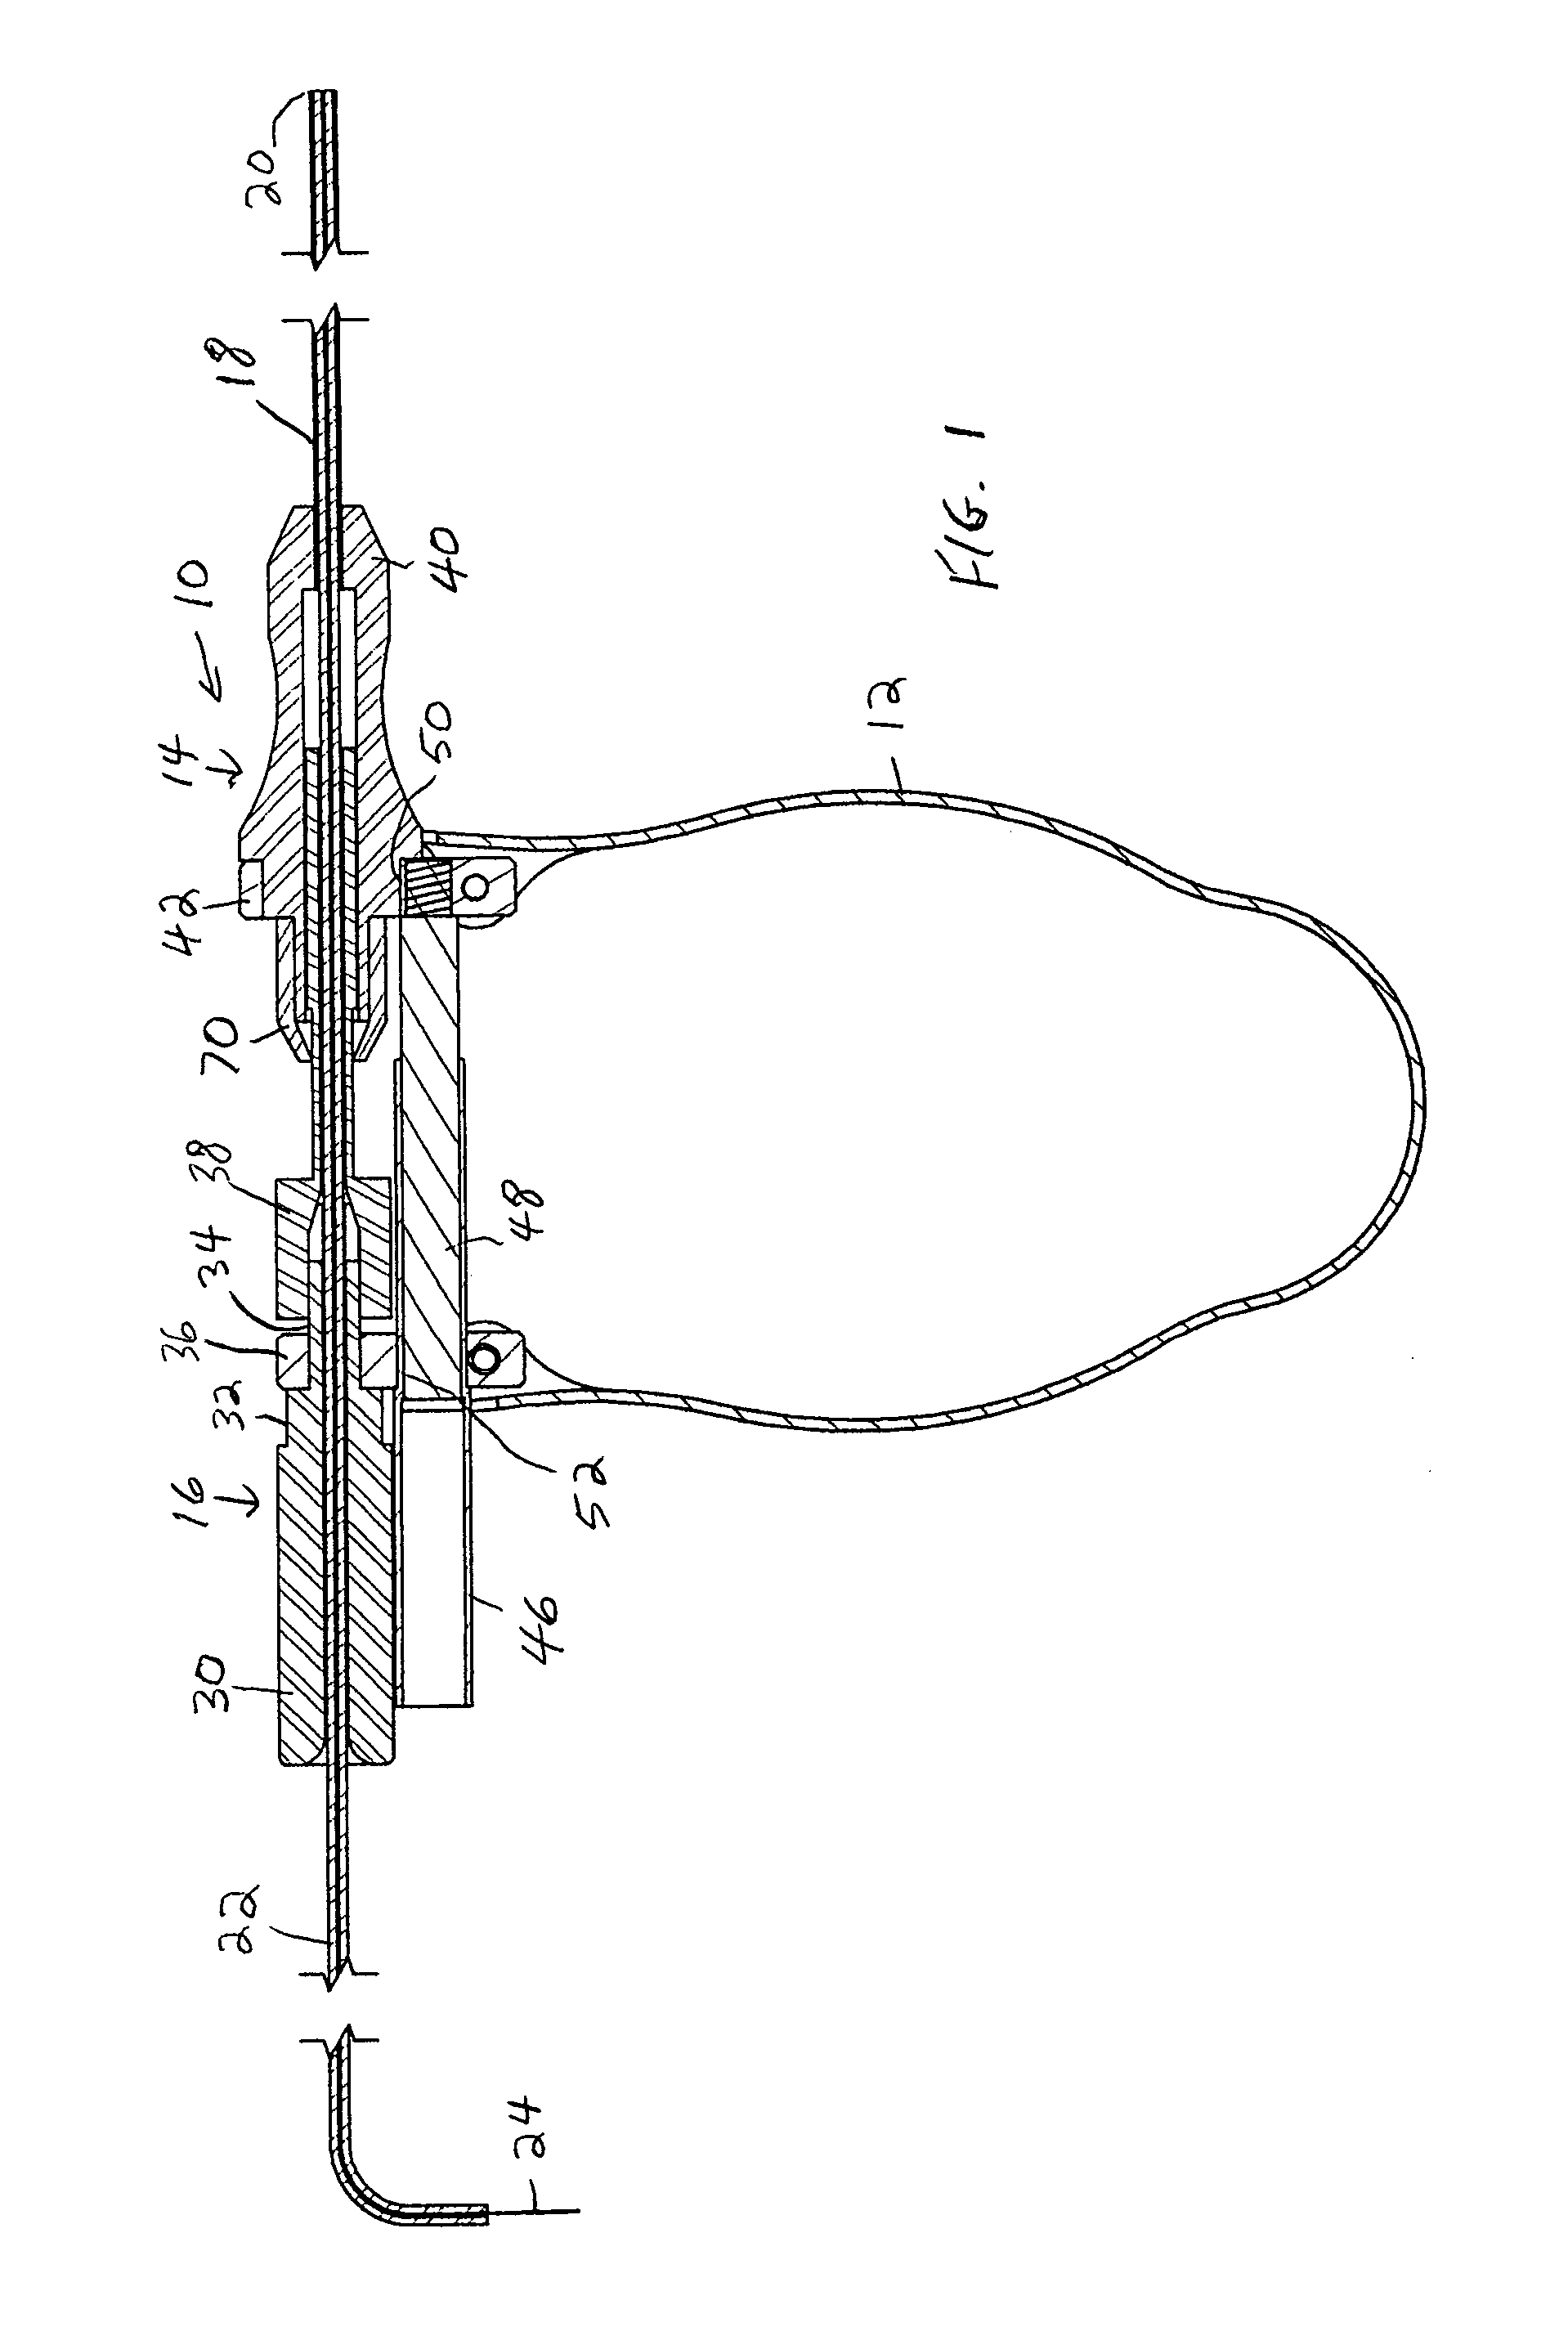 Position-controllable laser surgical instrument